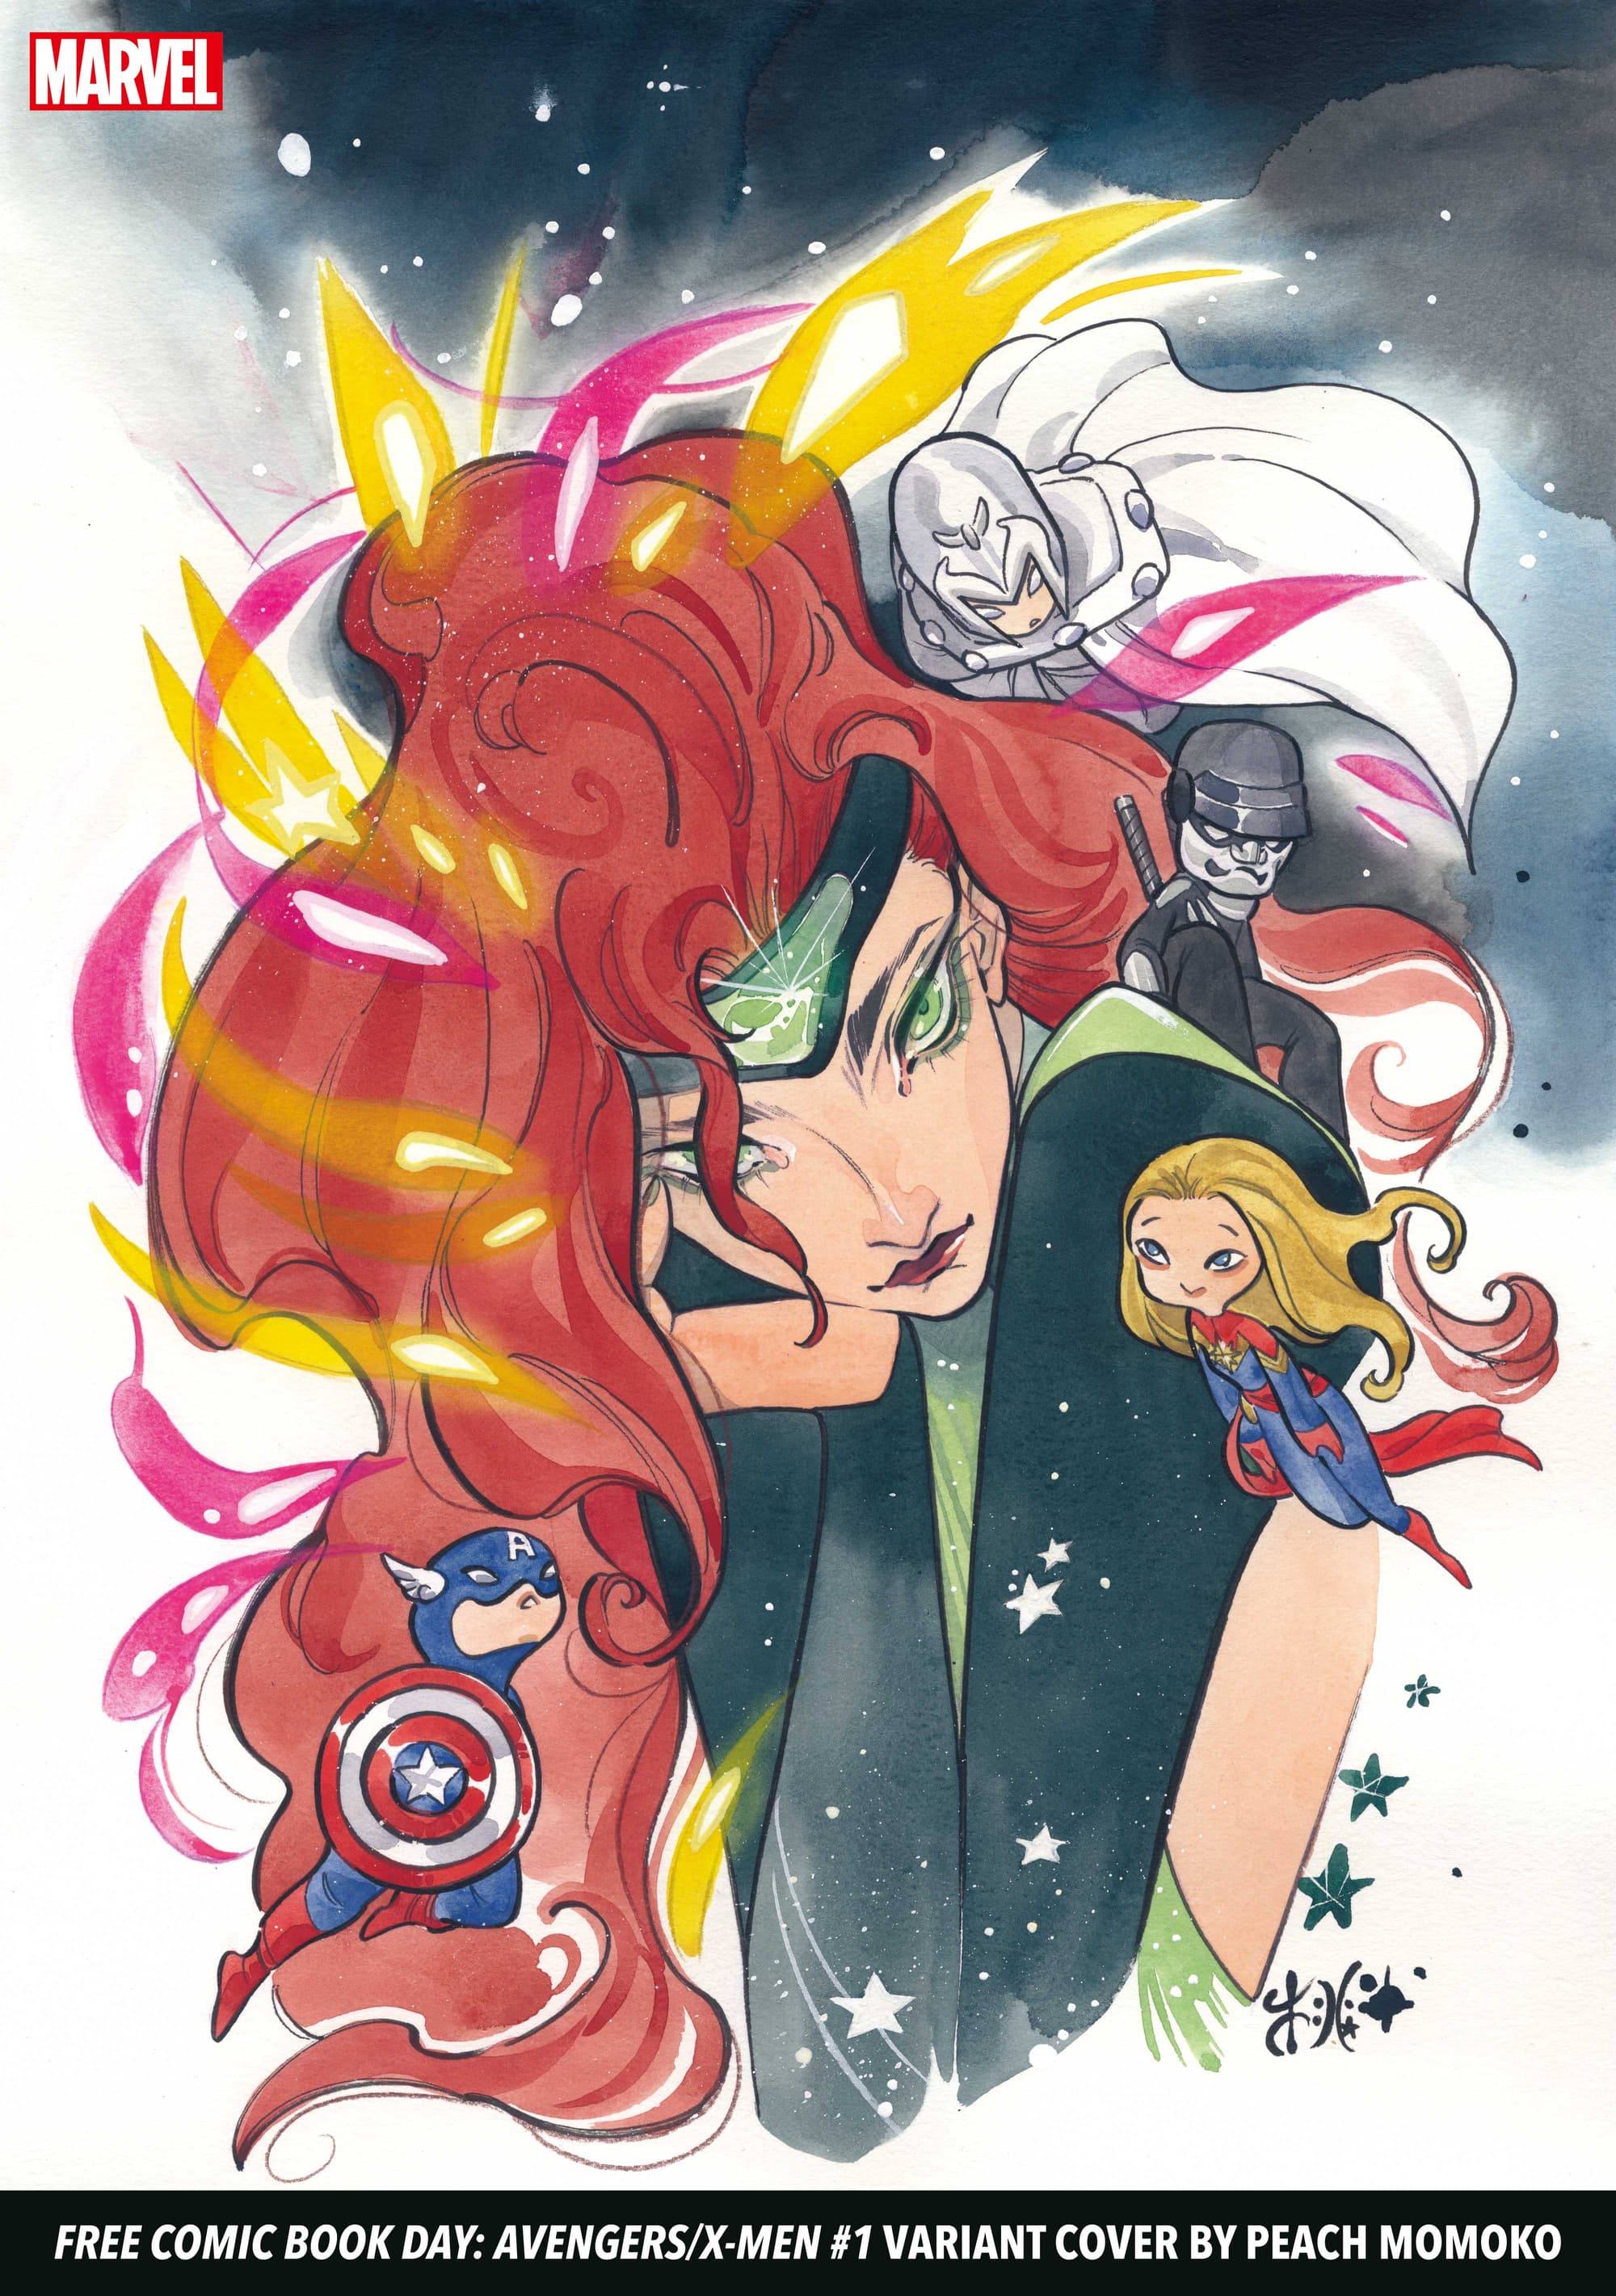 Free Comic Book Day: Avengers/X-Men - Variant Cover by PEACH MOMOKO